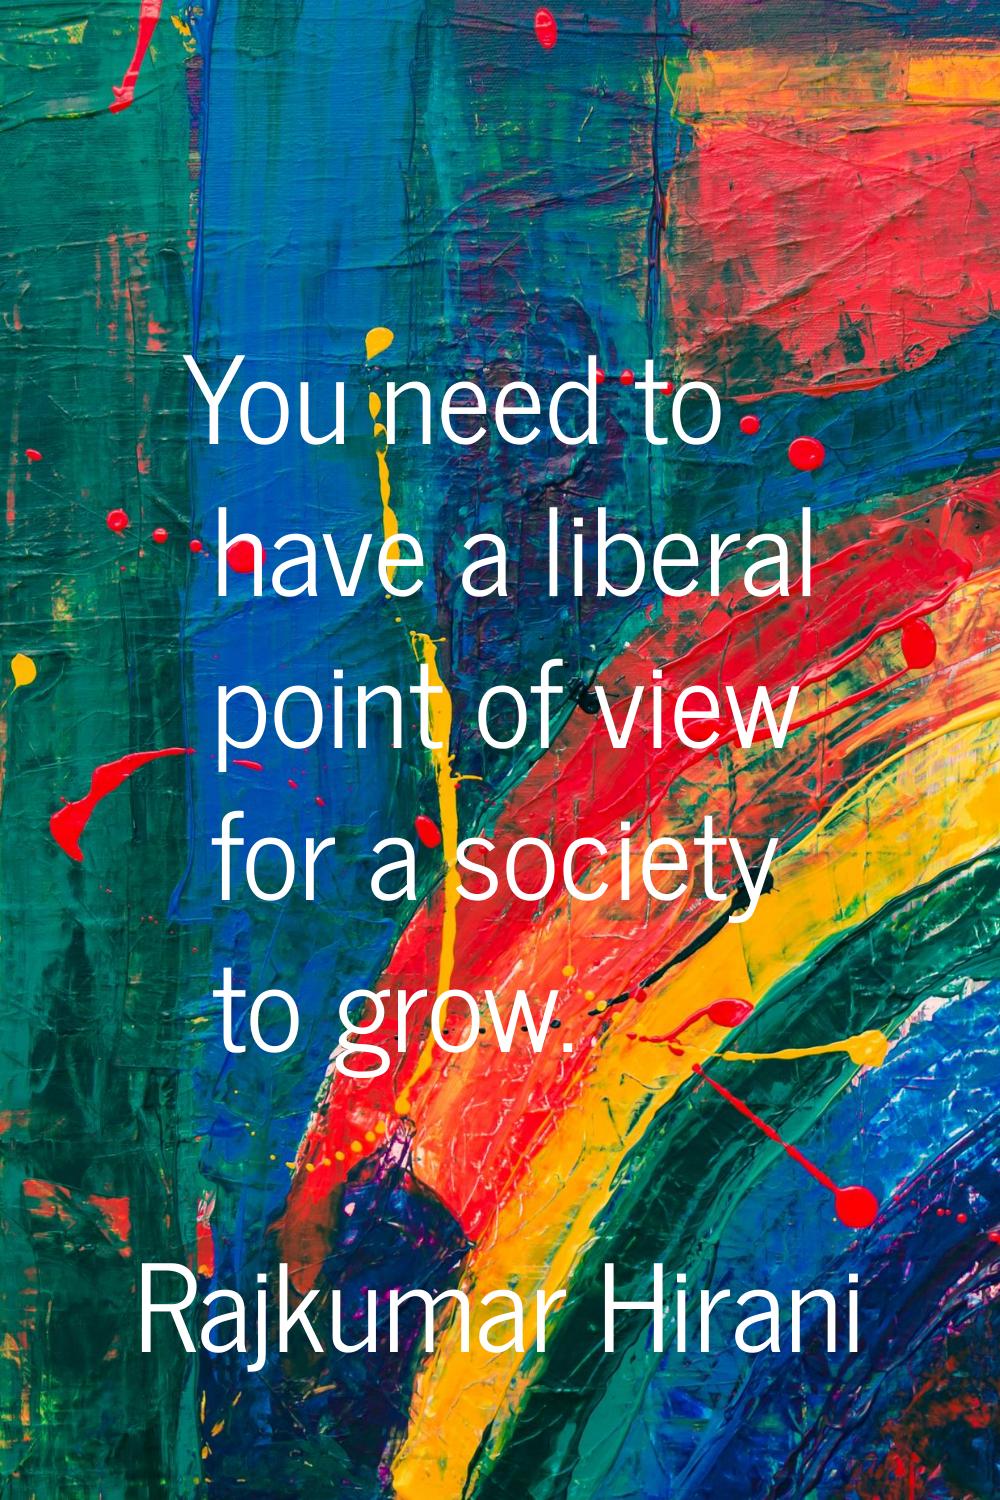 You need to have a liberal point of view for a society to grow.